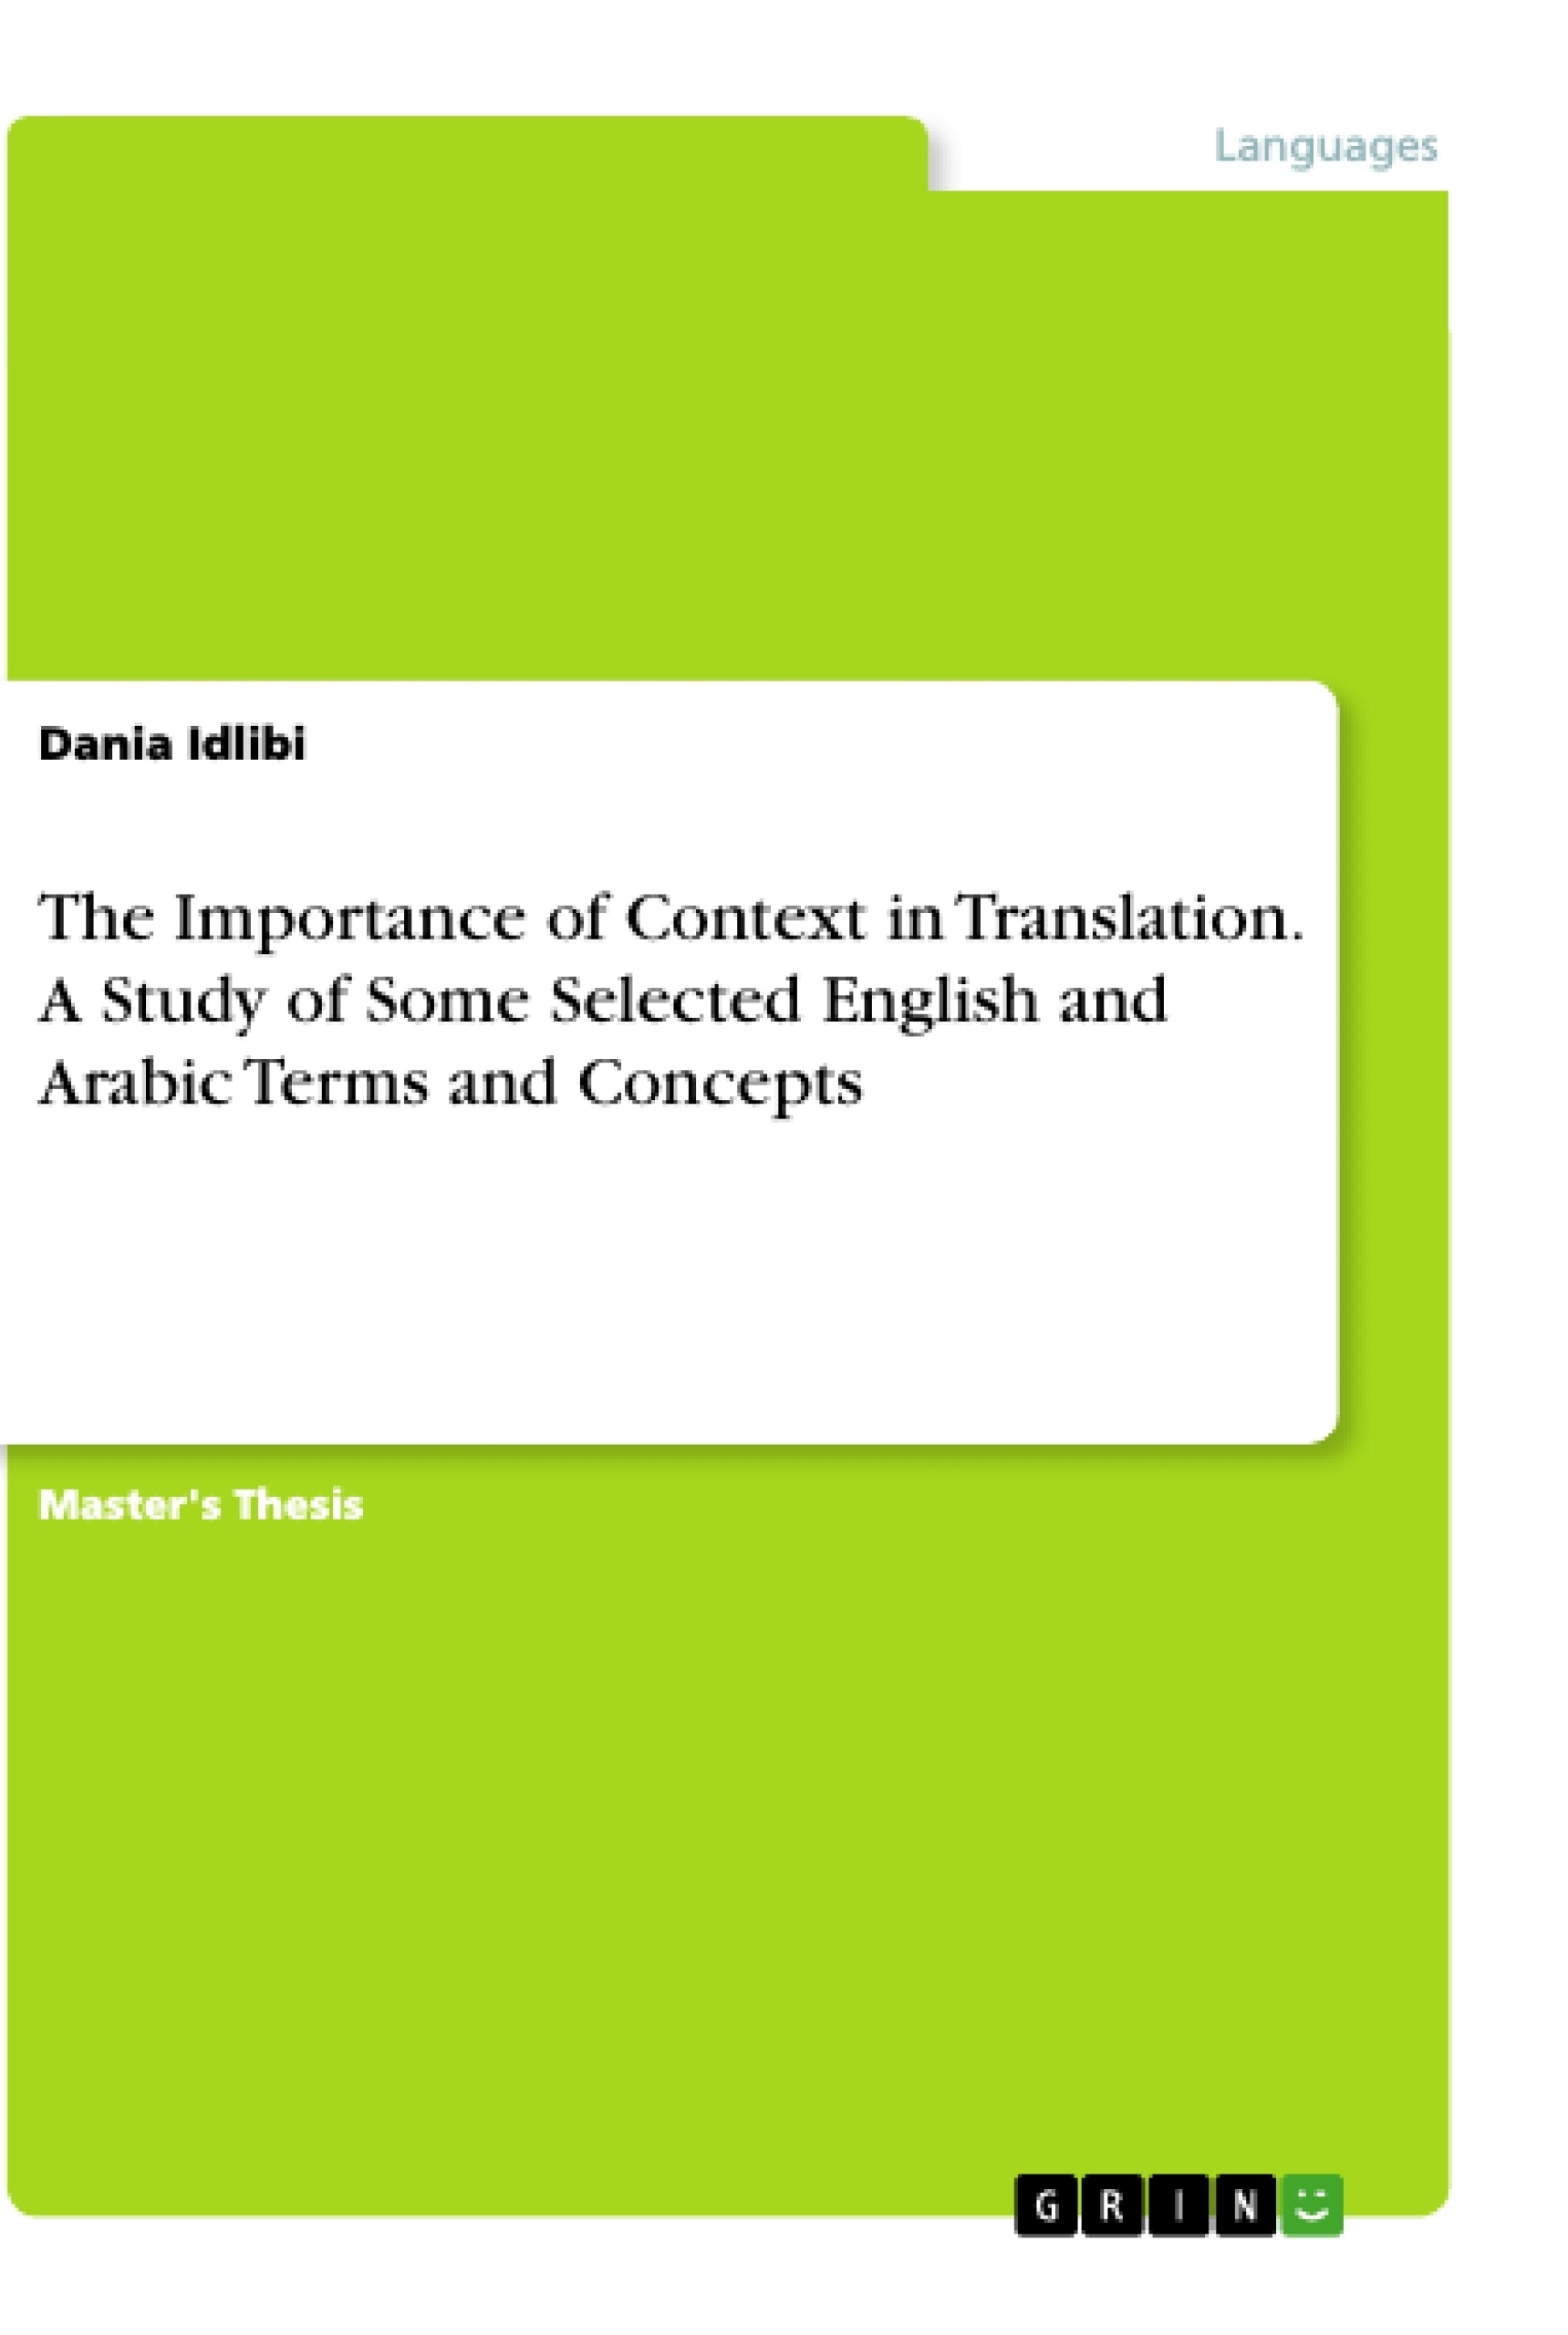 Título: The Importance of Context in Translation. A Study of Some Selected English and Arabic Terms and Concepts